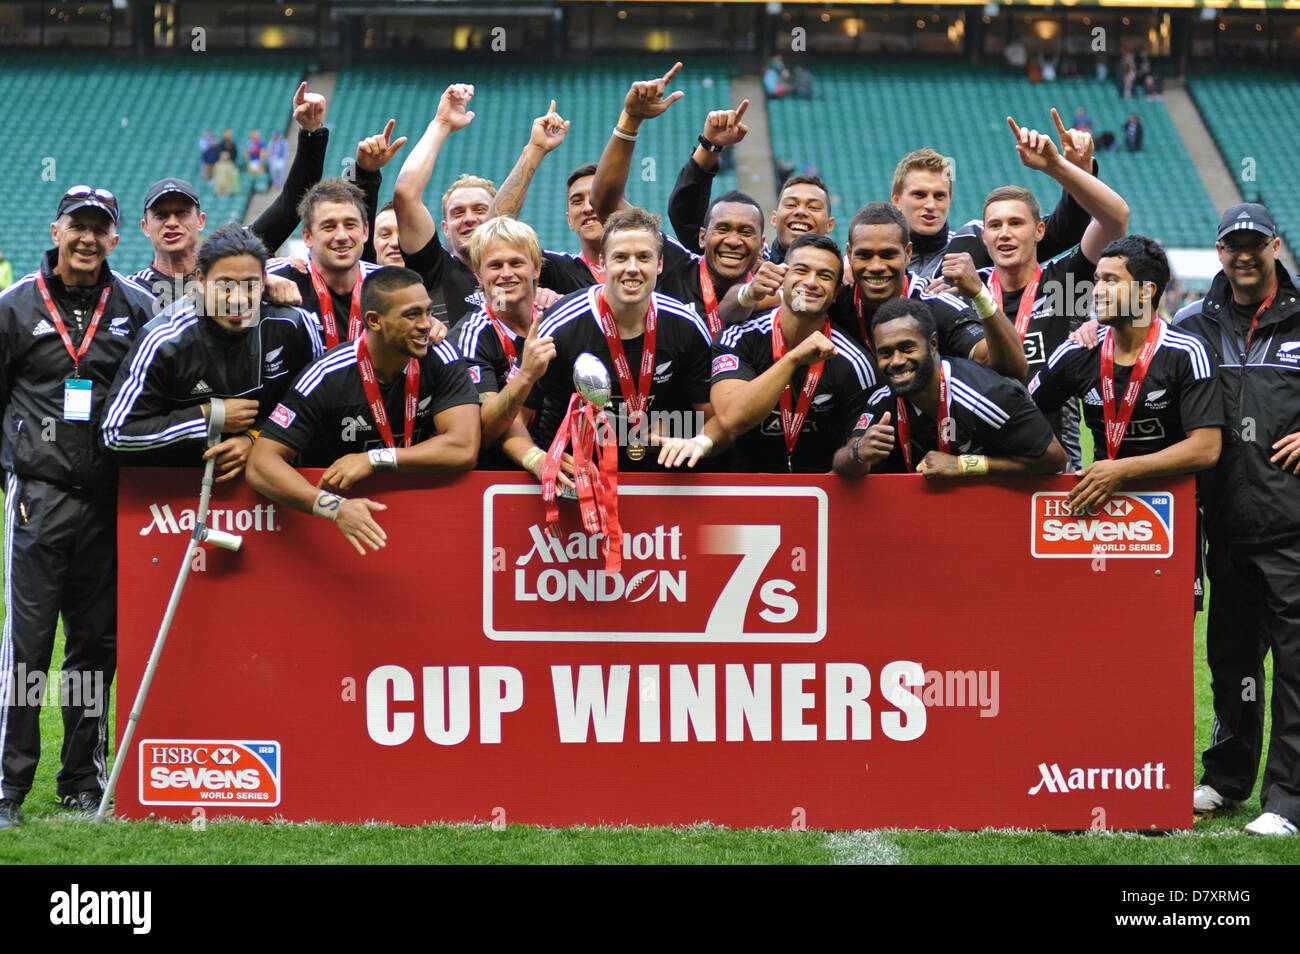 The New Zealand All Blacks Sevens team celebrating their overall victory in the London section of the HSBC Sevens World Series rugby competition at Twickenham Stadium, London. The London Sevens trophy is held by Tim Mikkelson (Back, Captain). The All Blacks won after beating the Australia 47-12 in the final. Stock Photo